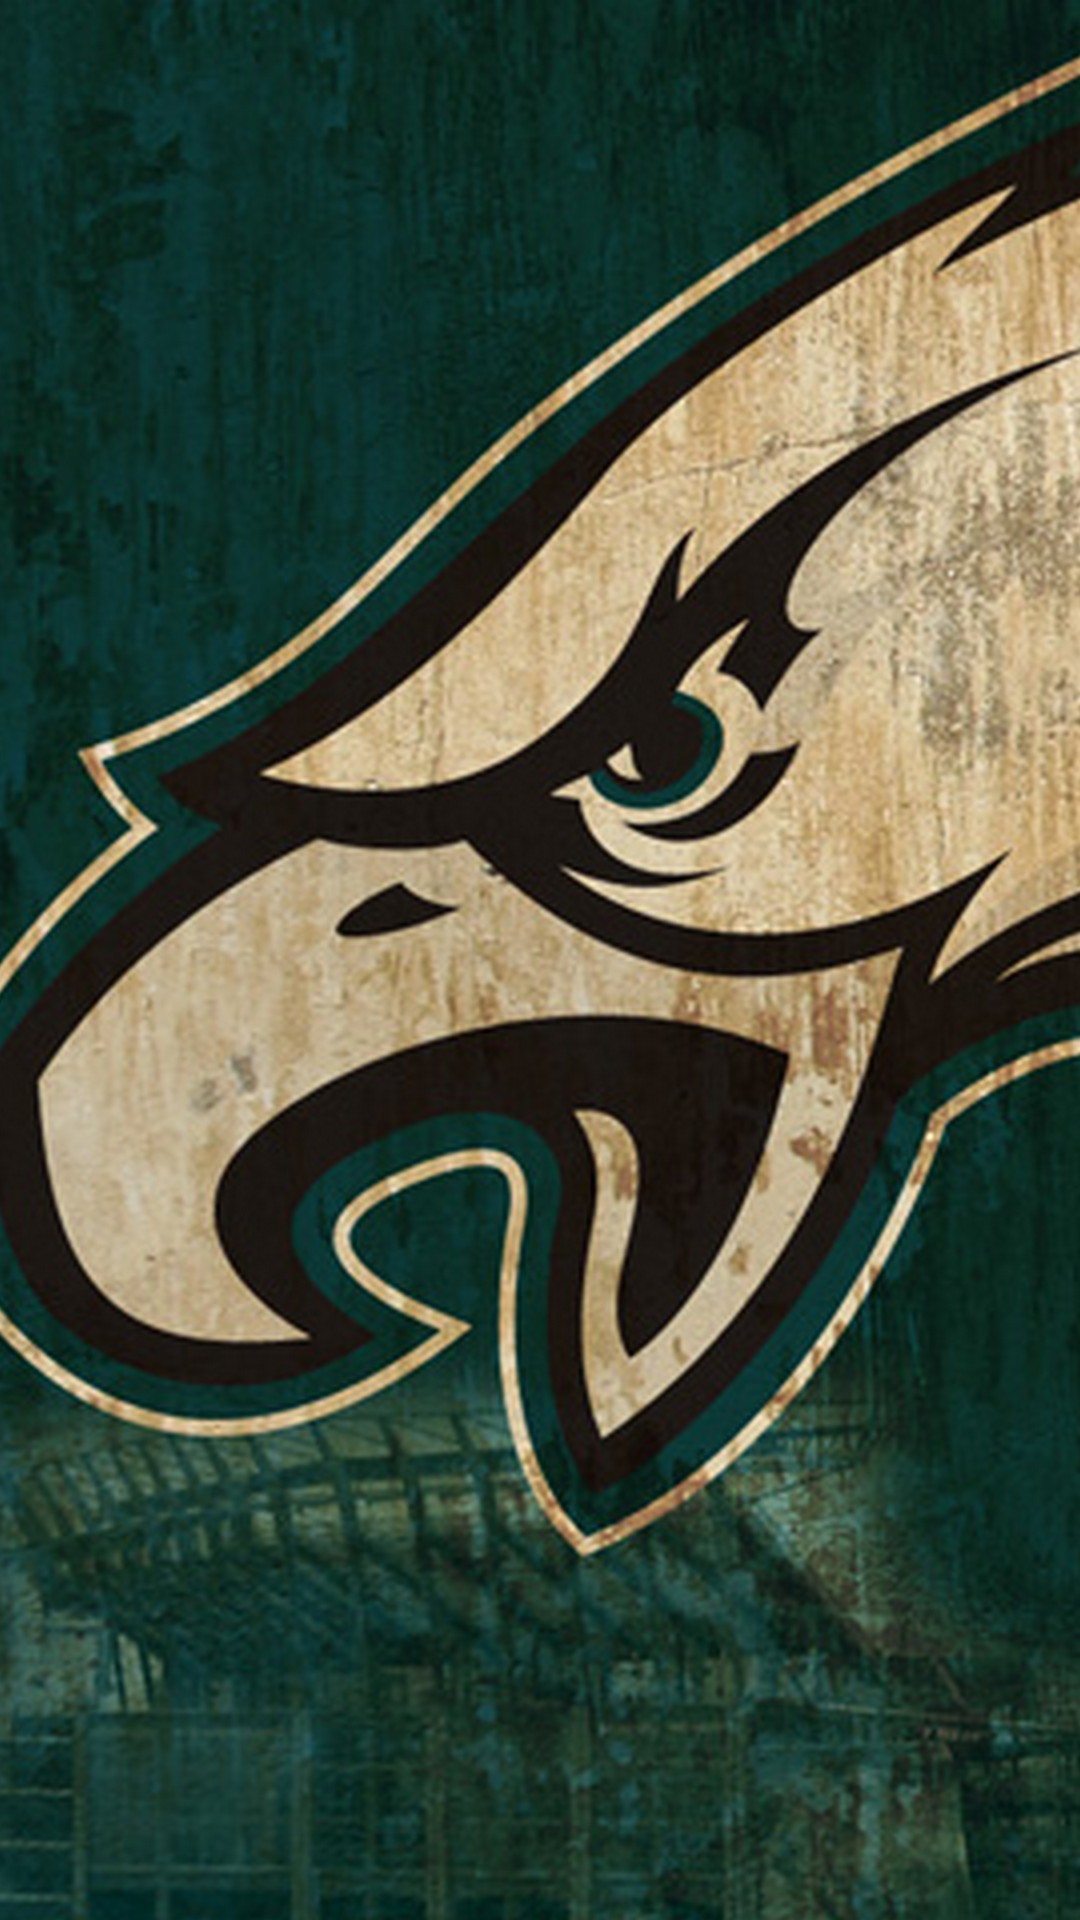 The Eagles Iphone X Wallpaper With Resolution Pixel - Philadelphia Eagles Wallpaper Iphone X - HD Wallpaper 